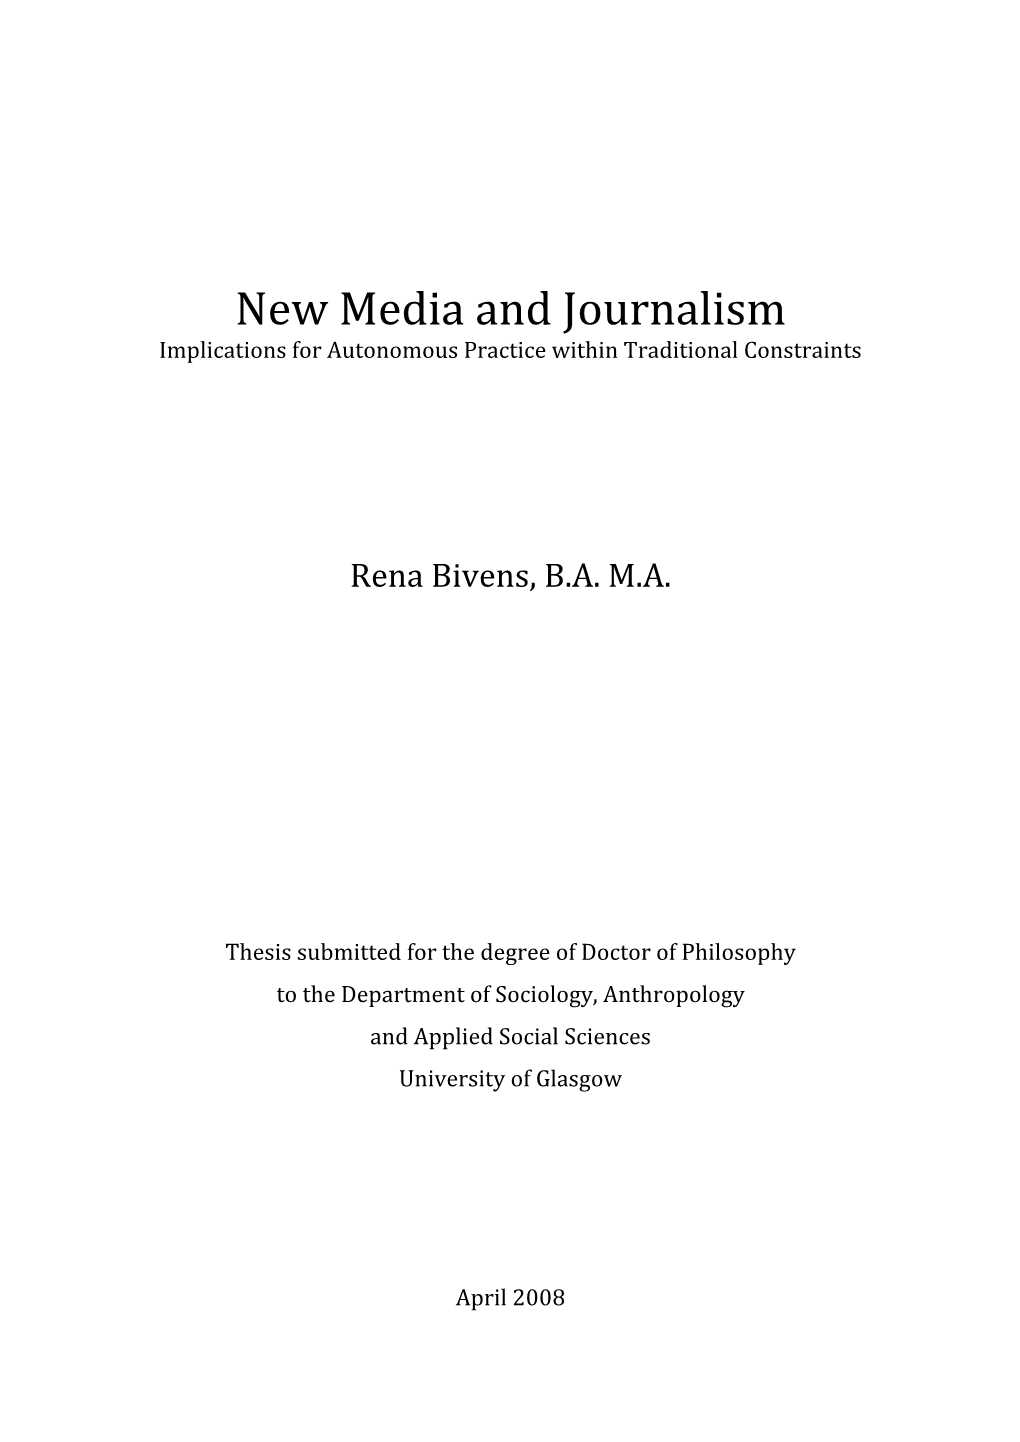 New Media and Journalism Implications for Autonomous Practice Within Traditional Constraints